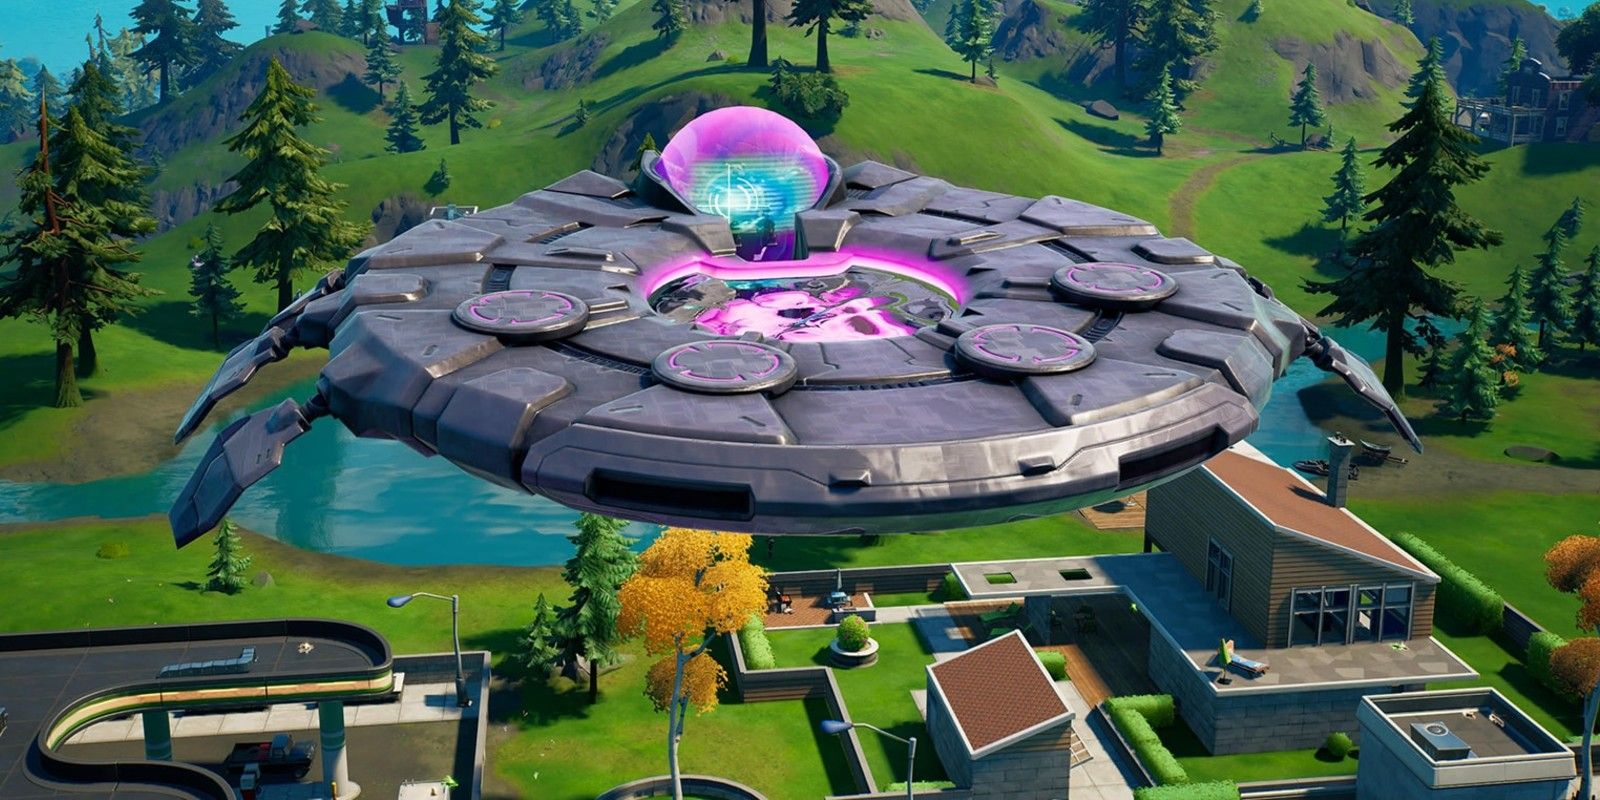 Players can drive UFOs in Fortnite Season 7